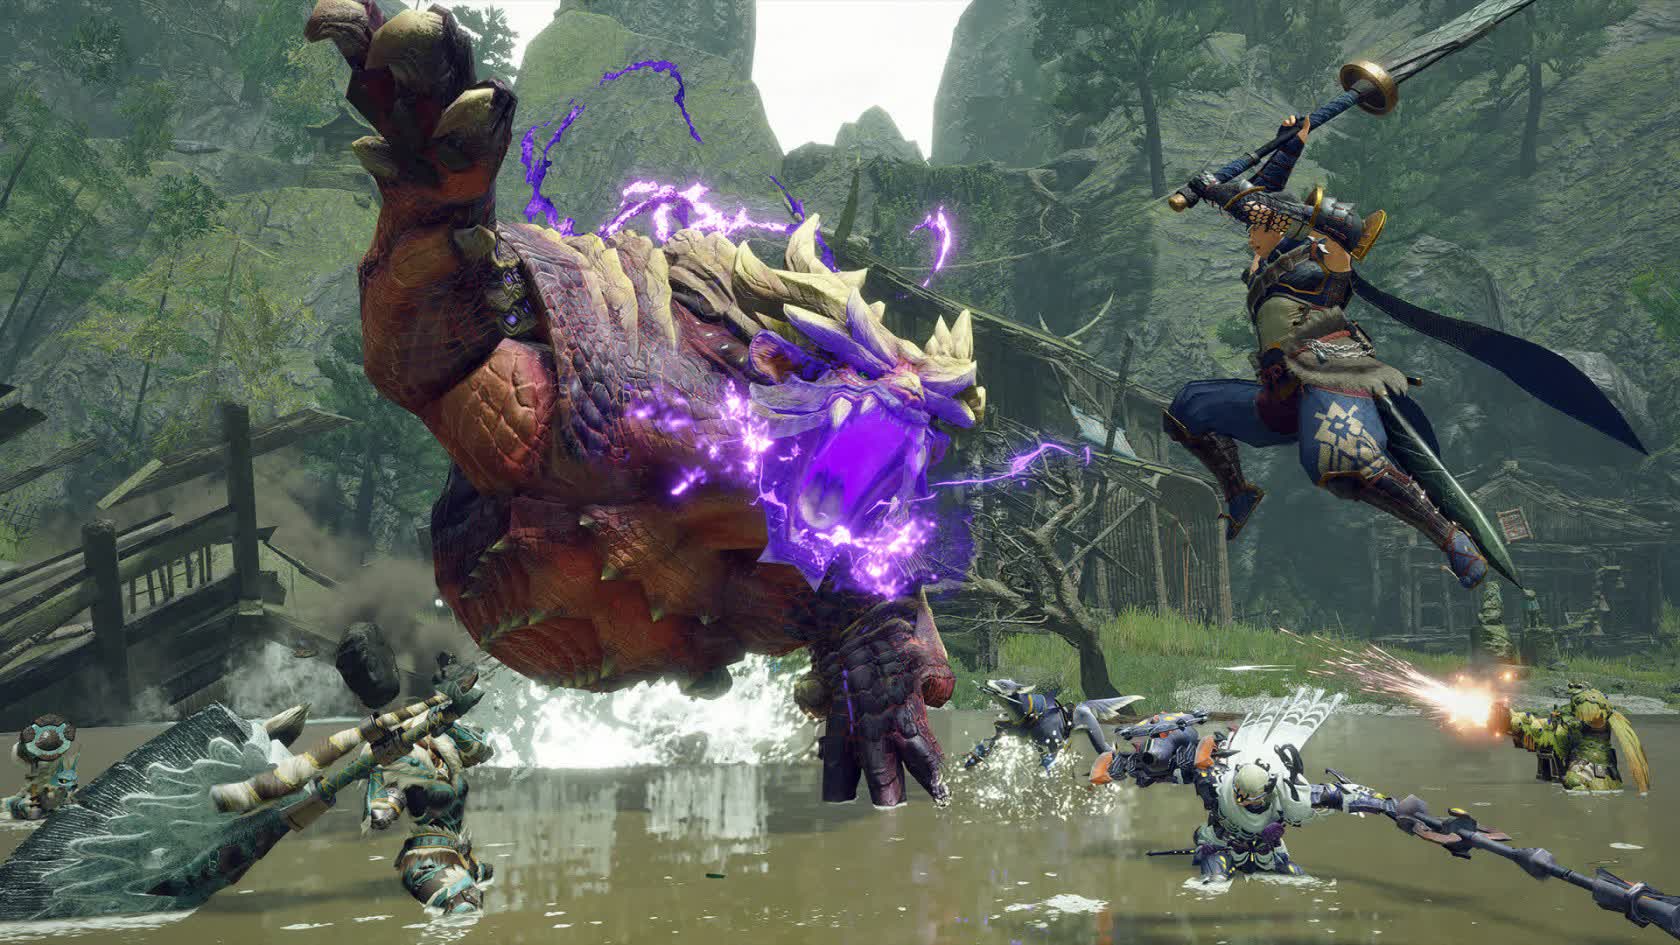 Capcom finds PC initiate date for Monster Hunter Upward thrust, with a free demo coming sooner